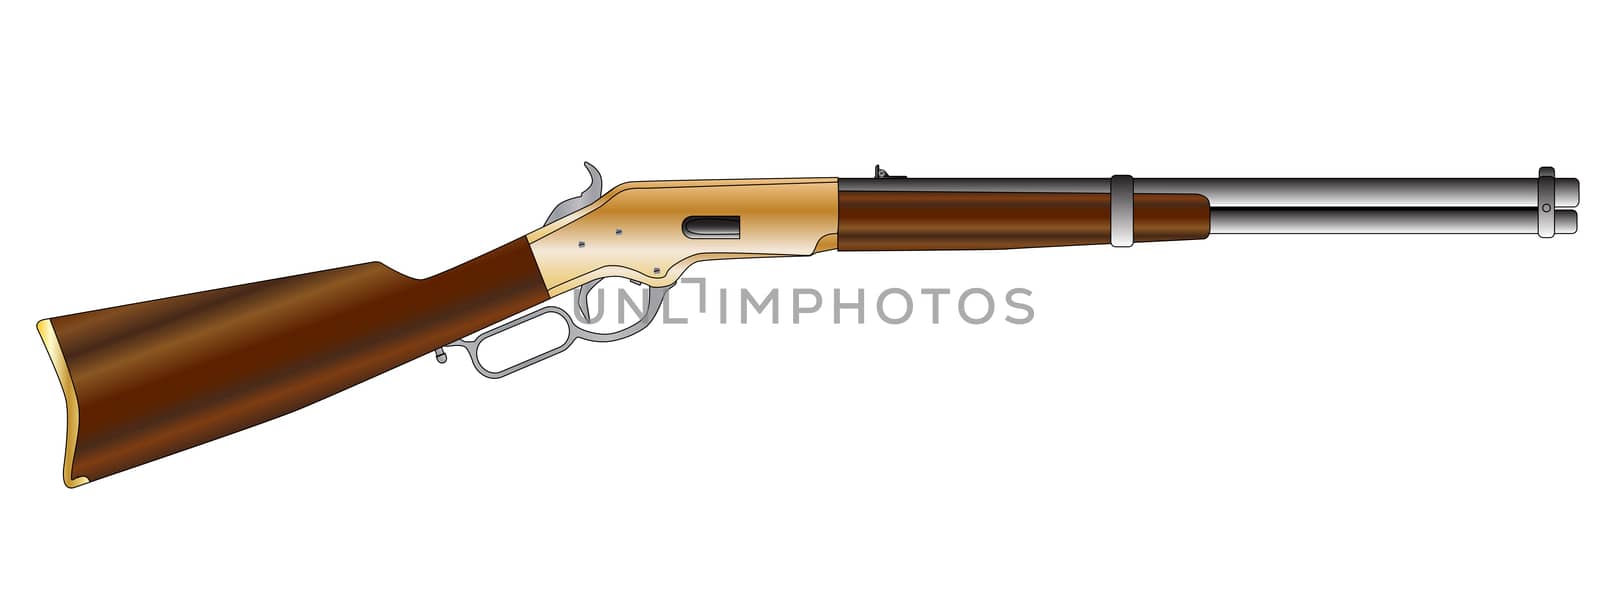 A typical wild west rifle isolated on a white background.